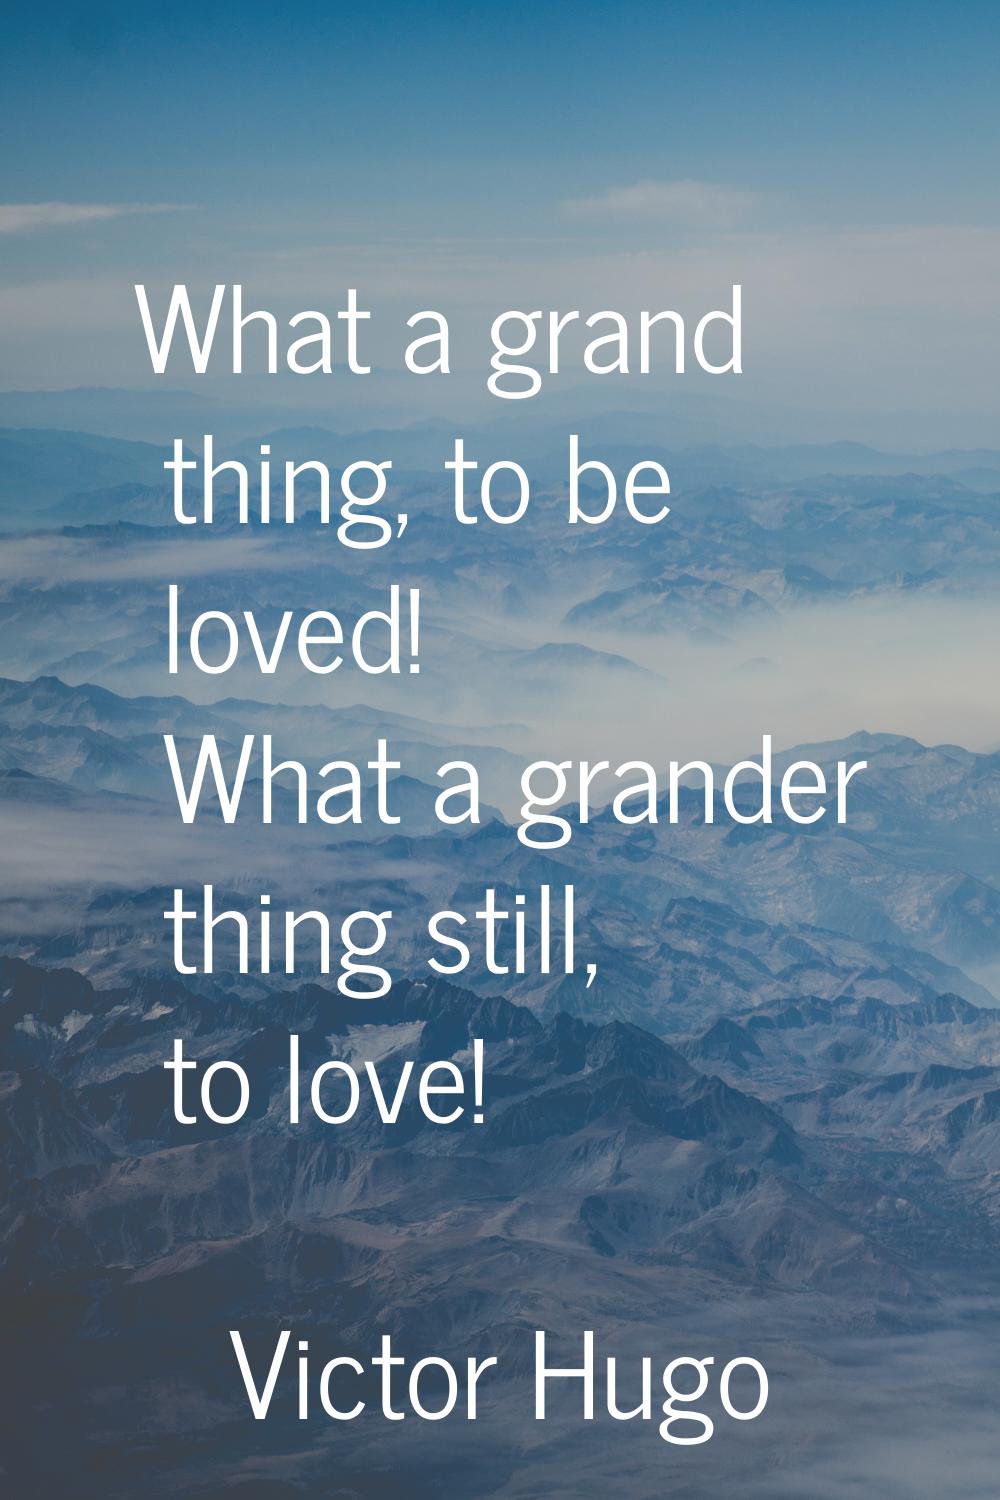 What a grand thing, to be loved! What a grander thing still, to love!